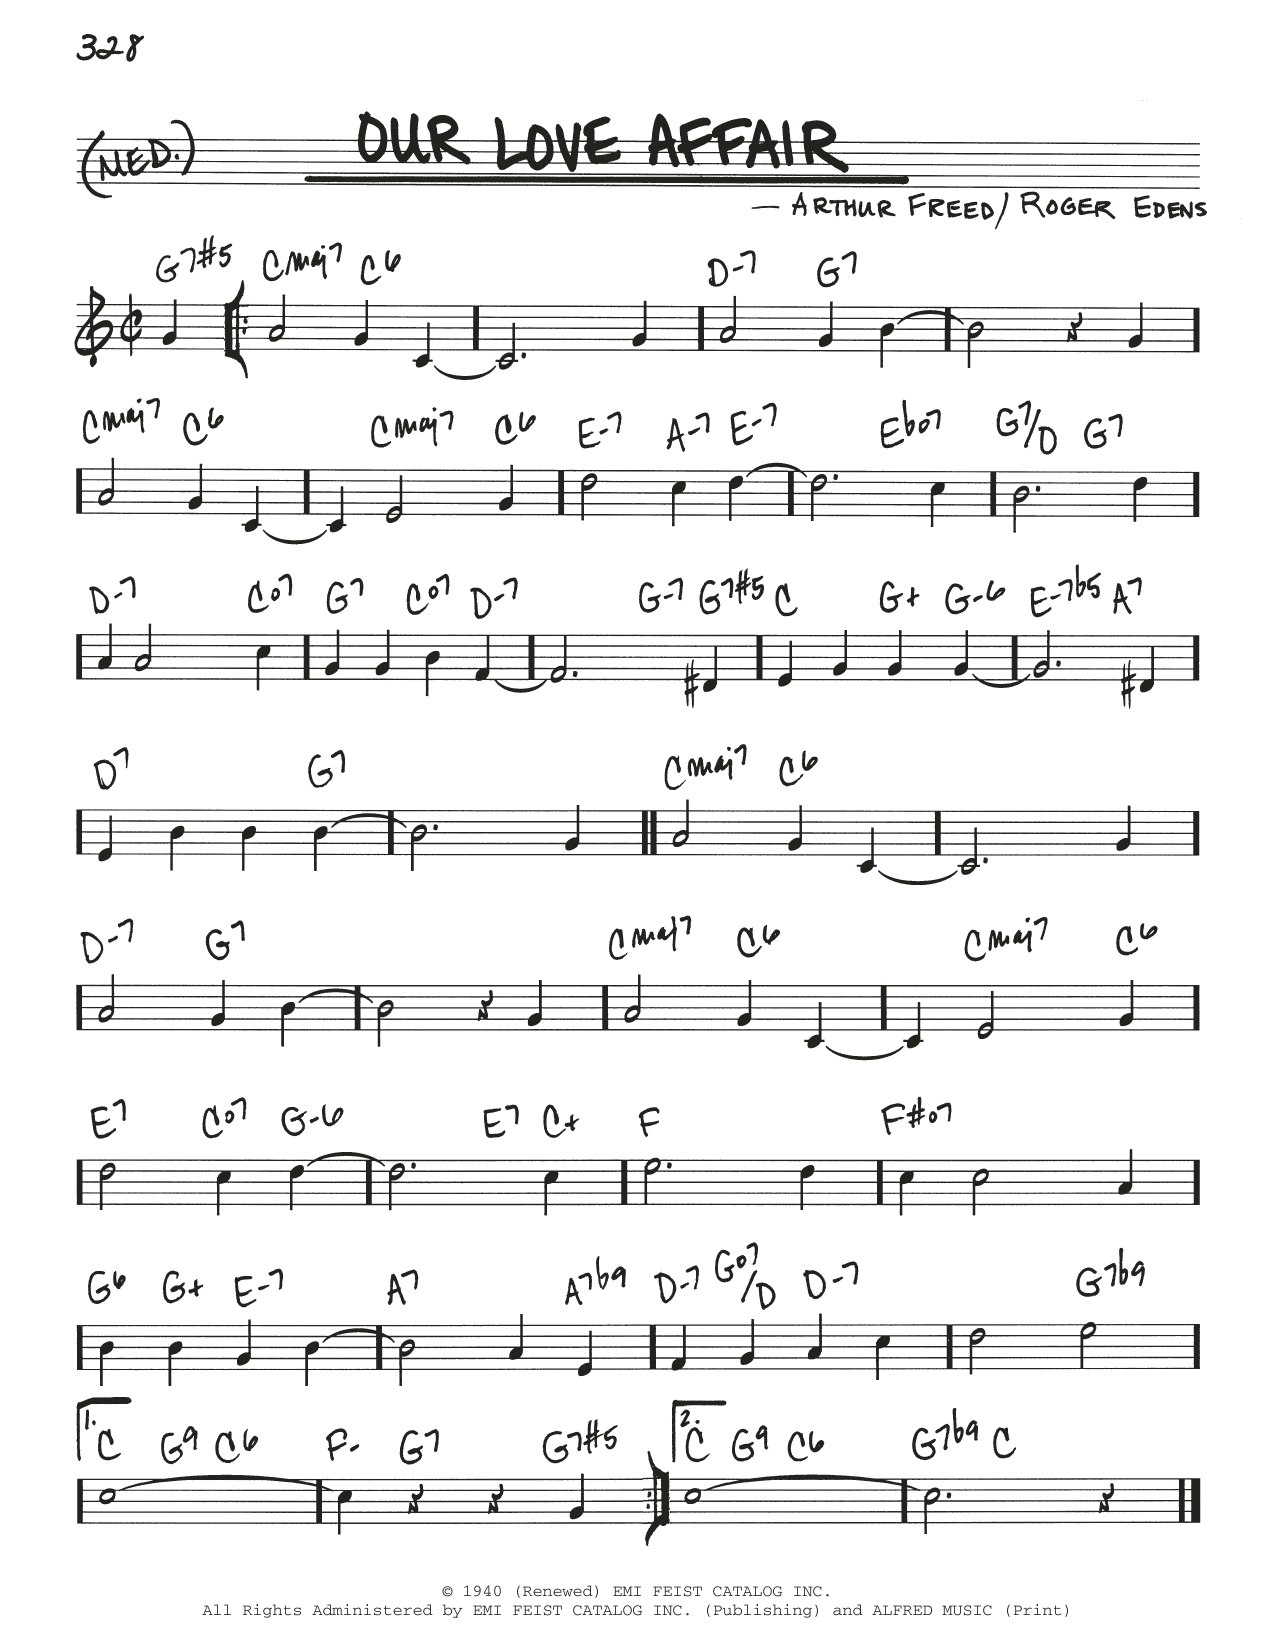 Arthur Freed Our Love Affair Sheet Music Notes Chords Download Printable Pdf 457654 Score 